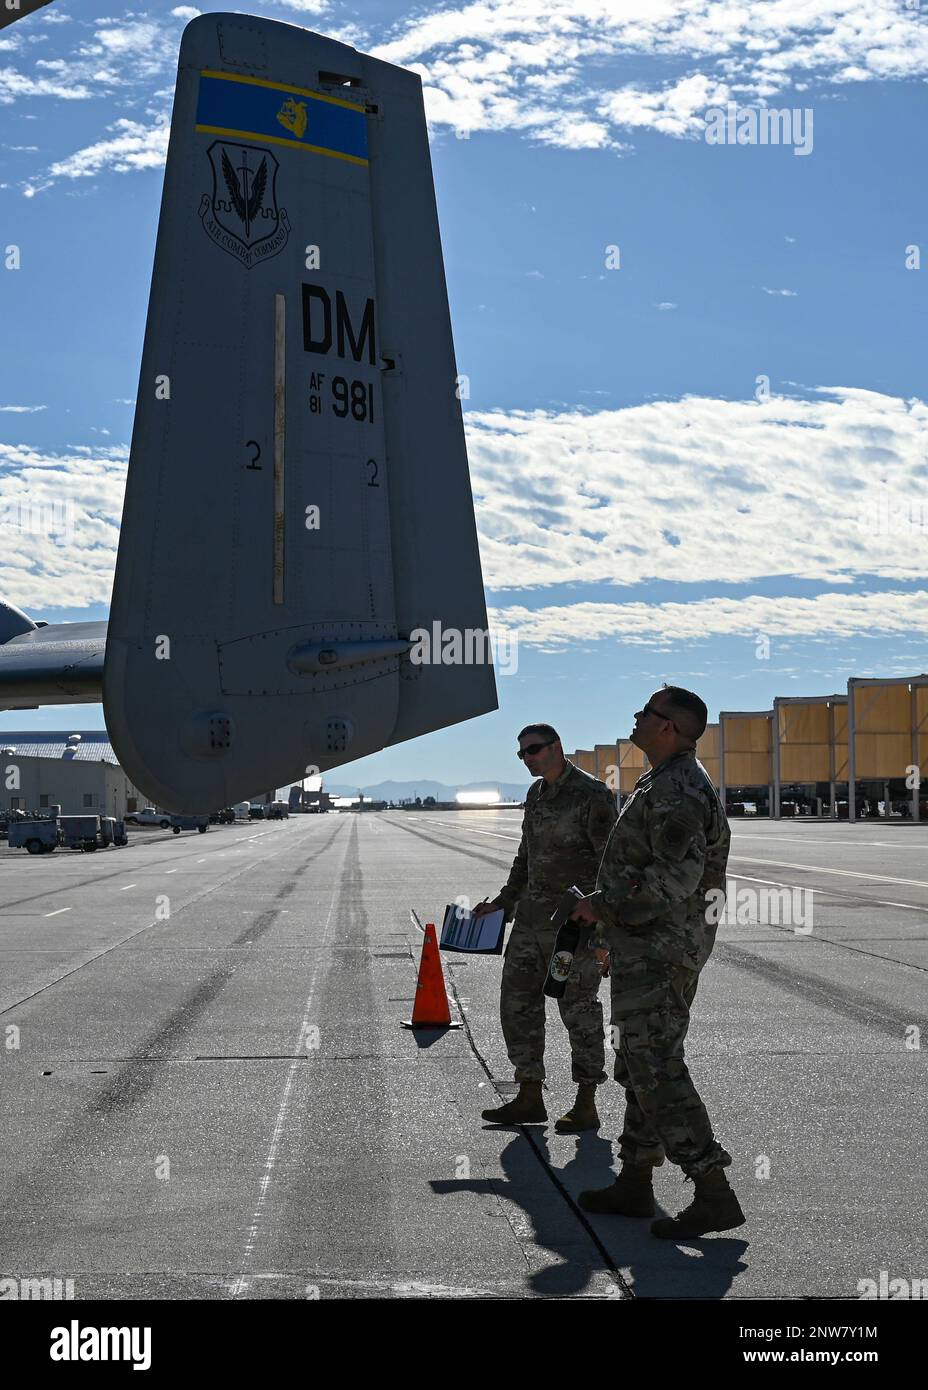 U.S. Air Force Airmen inspect an A-10 Thunderbolt II from the 354th Fighter Squadron during the 355th Maintenance Group’s 4th quarter crew chief competition at Davis-Monthan Air Force Base, Ariz., Jan. 6, 2023. Crew chiefs were tested on their knowledge of the A-10 while their aircraft was inspected for cleanliness, as well as decorative elements. Stock Photo